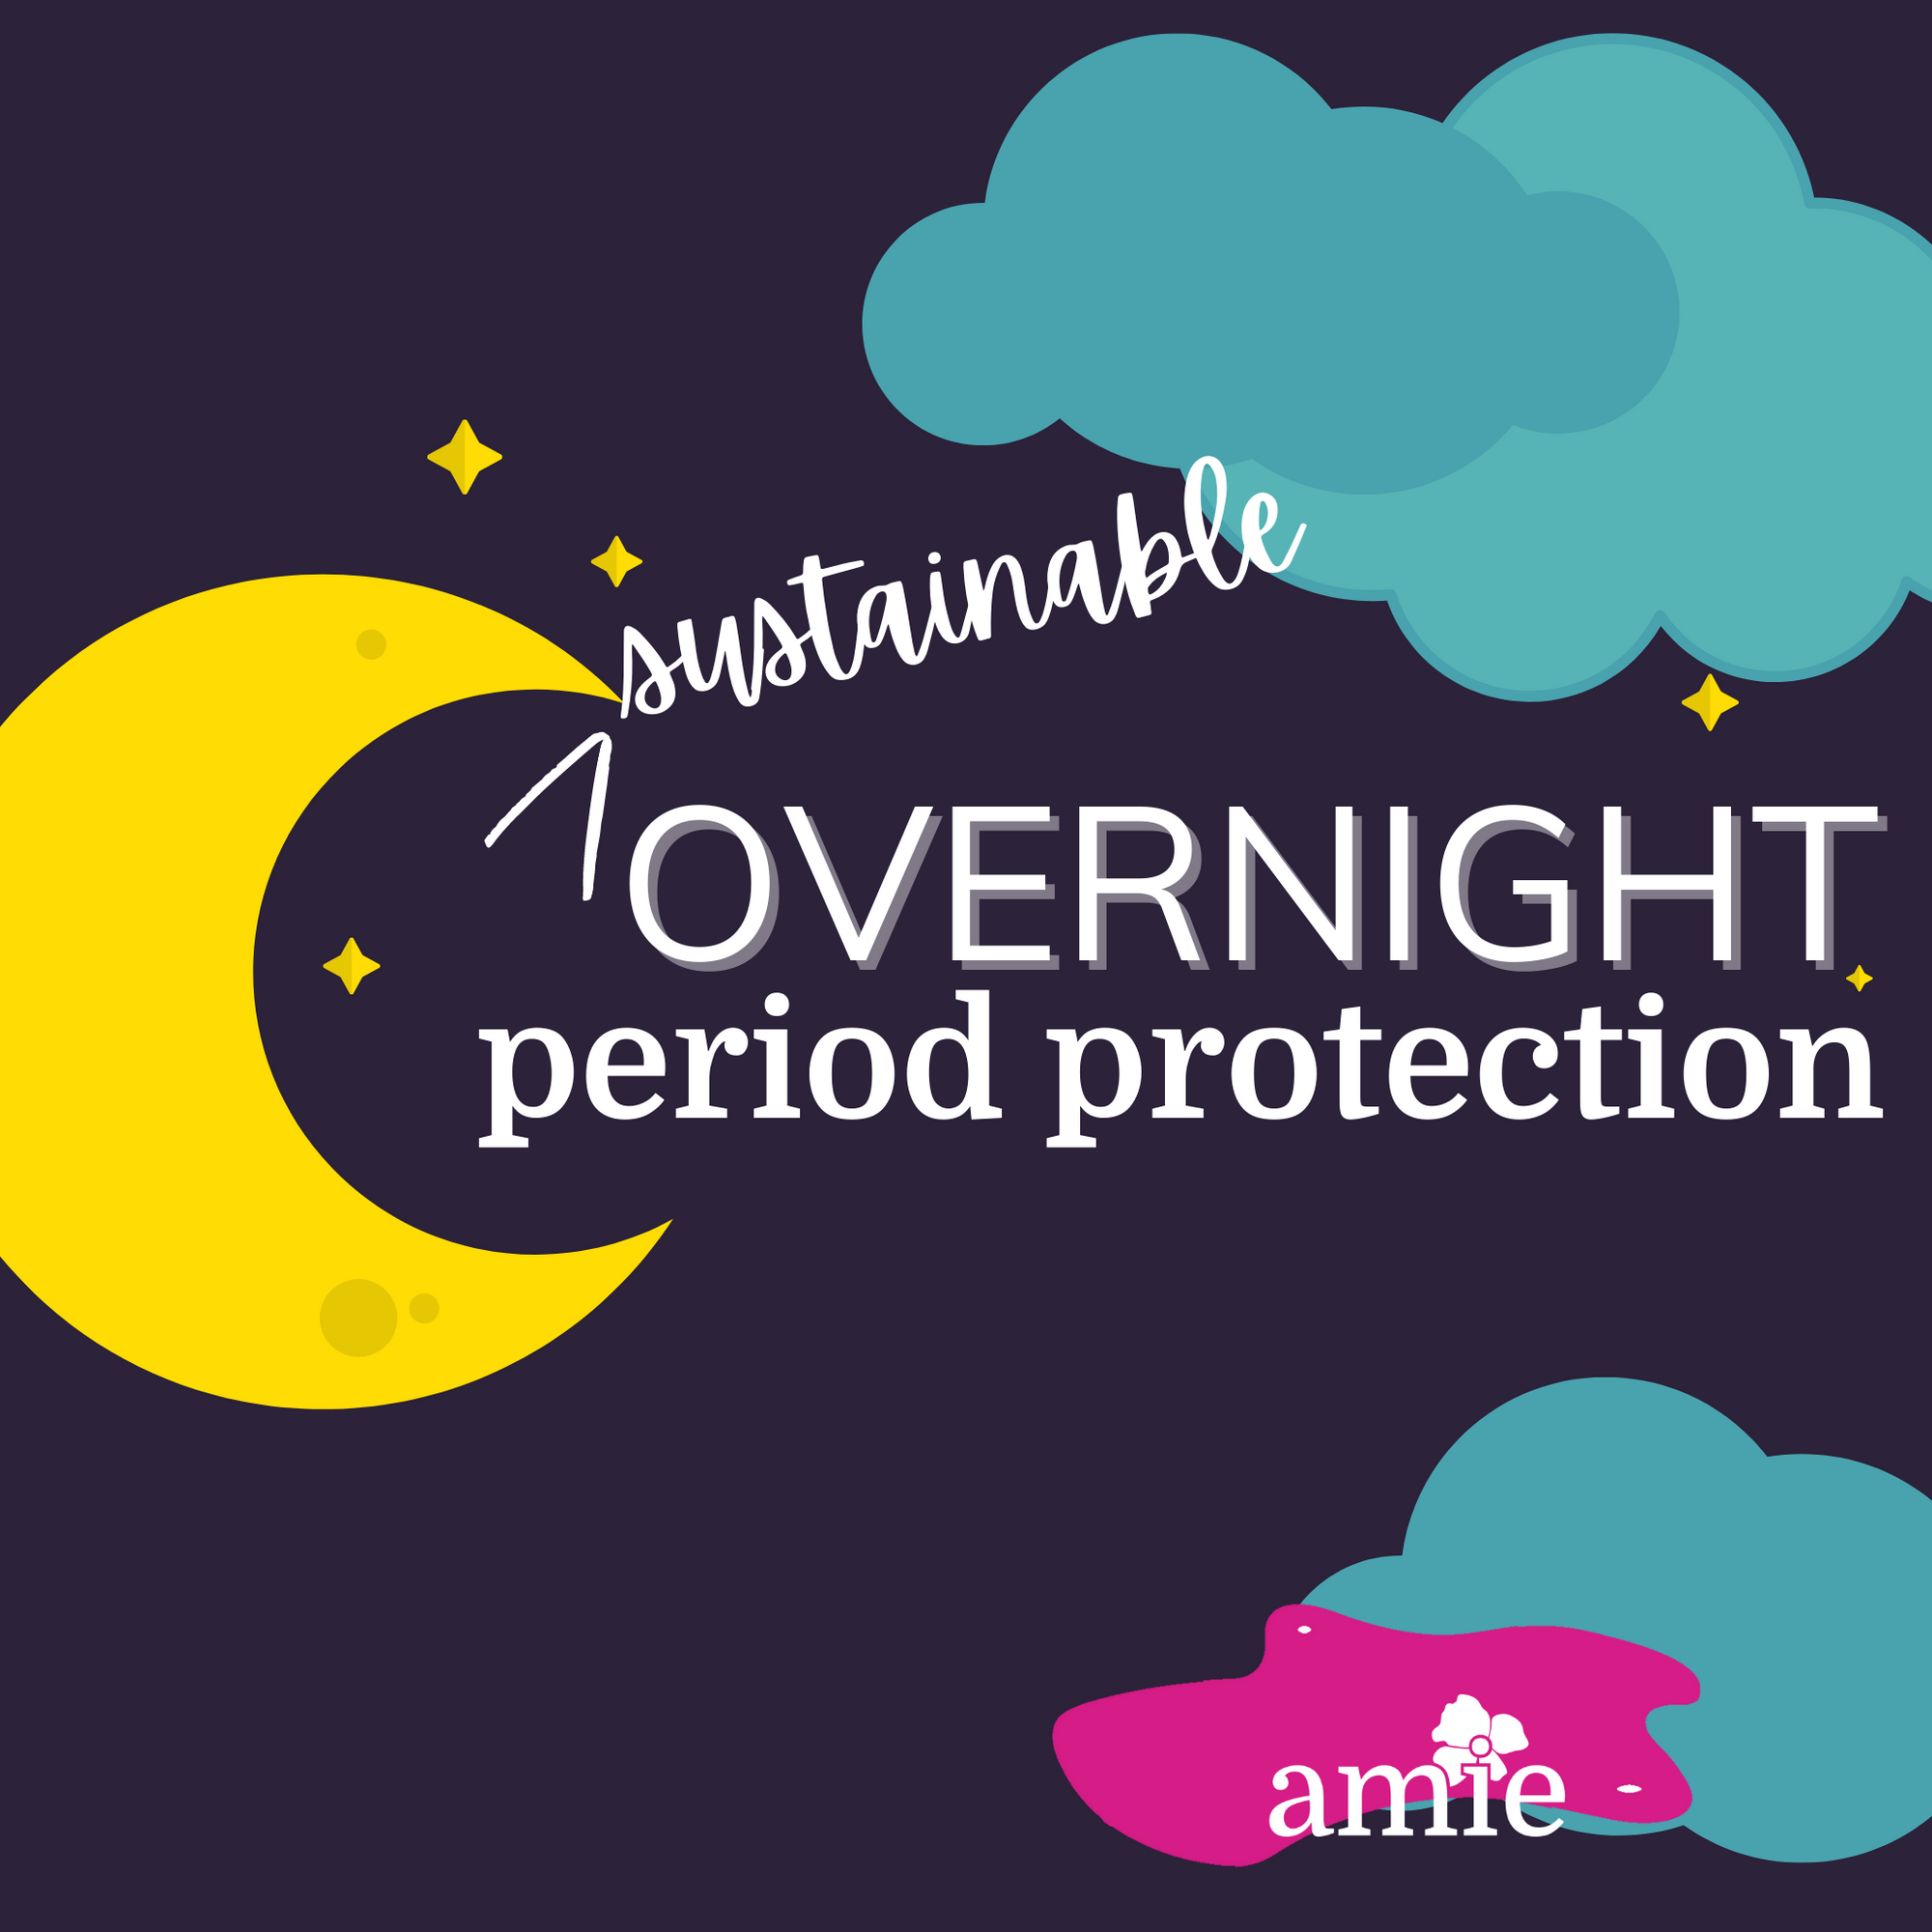 sustainable overnight period protection blog post image moon clouds pad